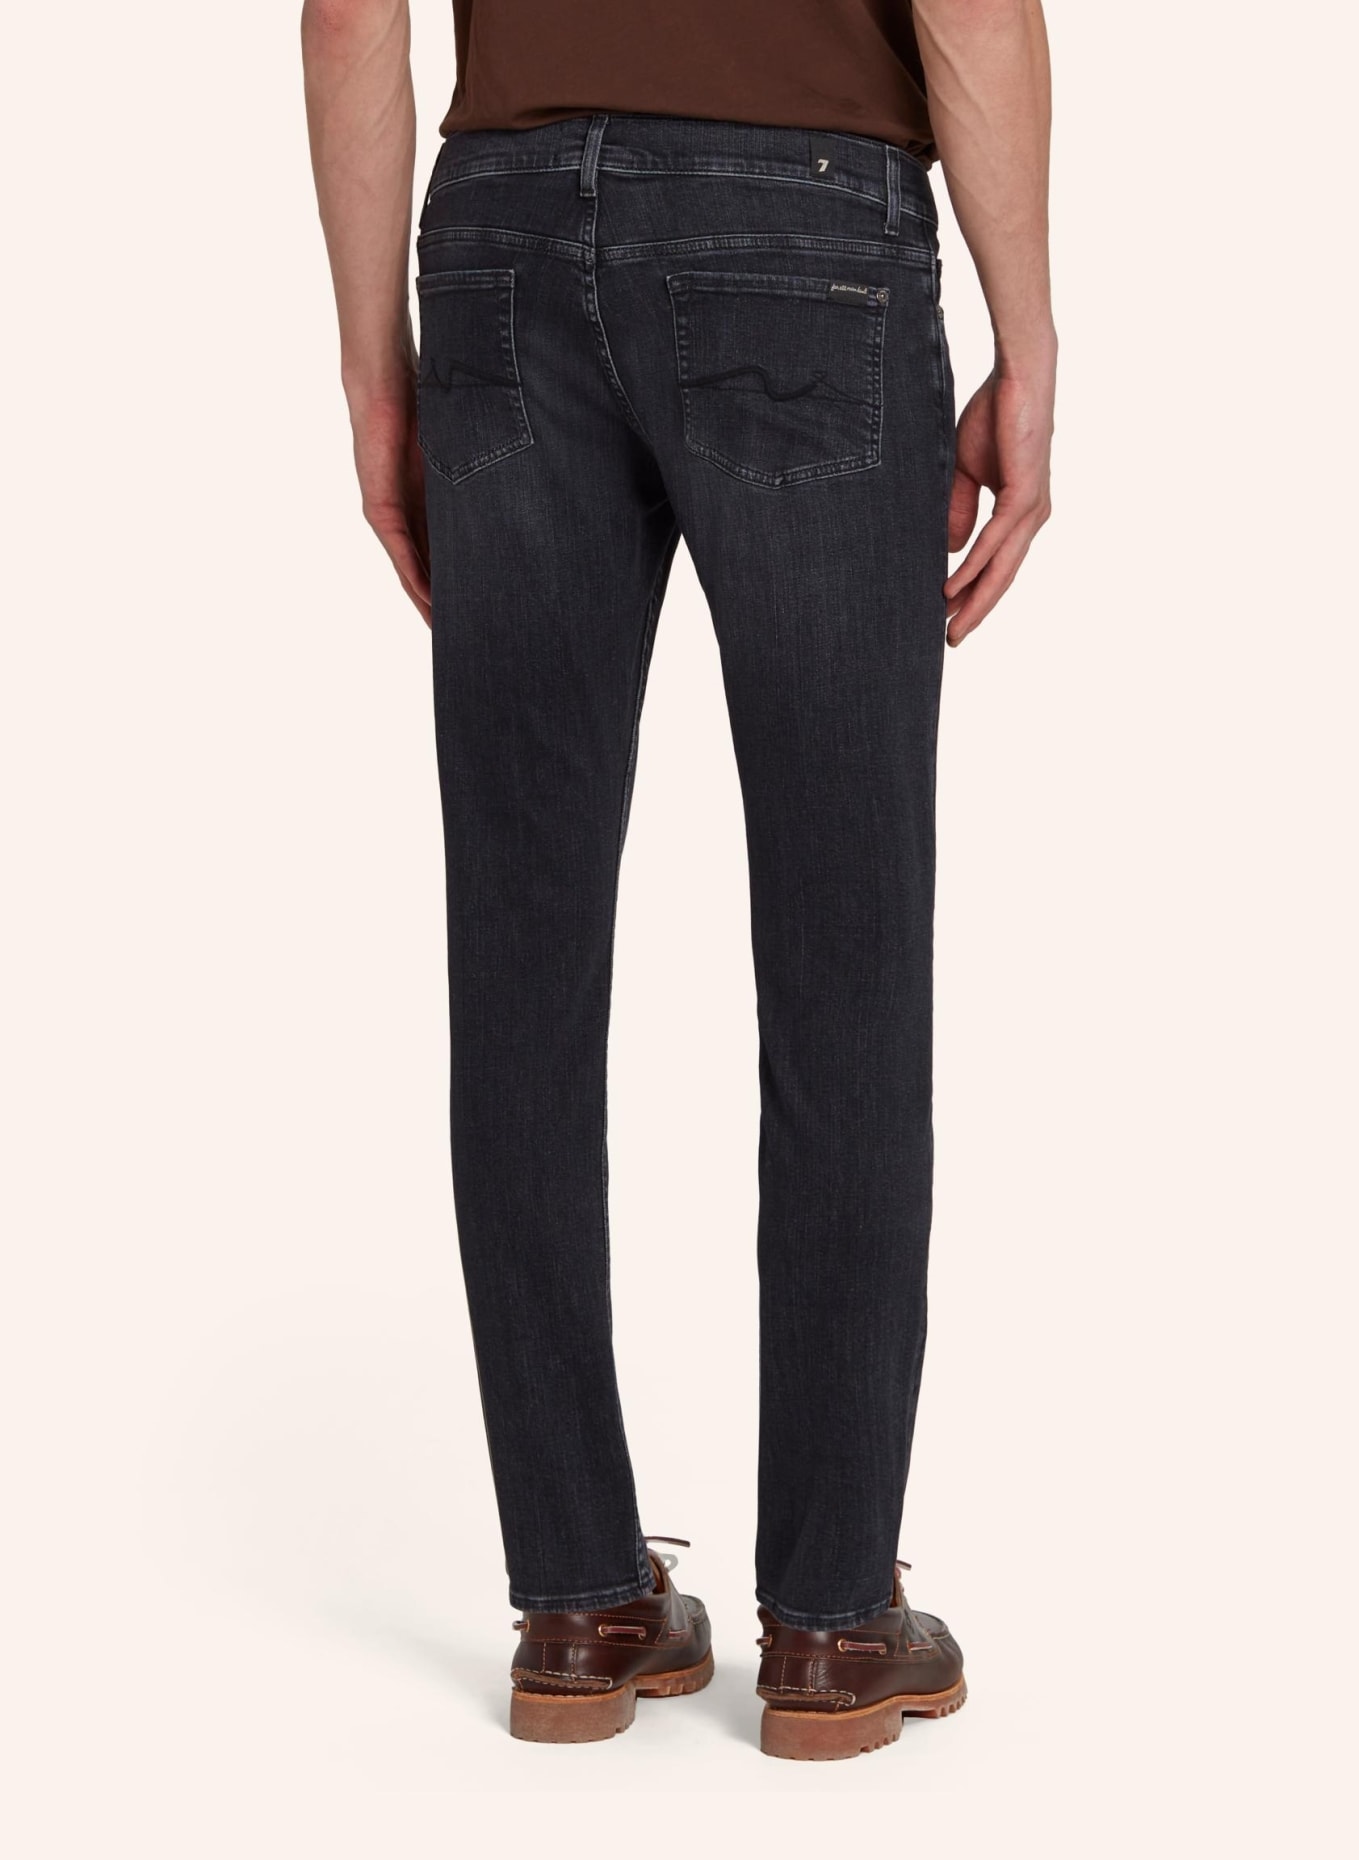 7 for all mankind Jeans PAXTYN TAPERED Skinny Fit, Farbe: SCHWARZ (Bild 2)